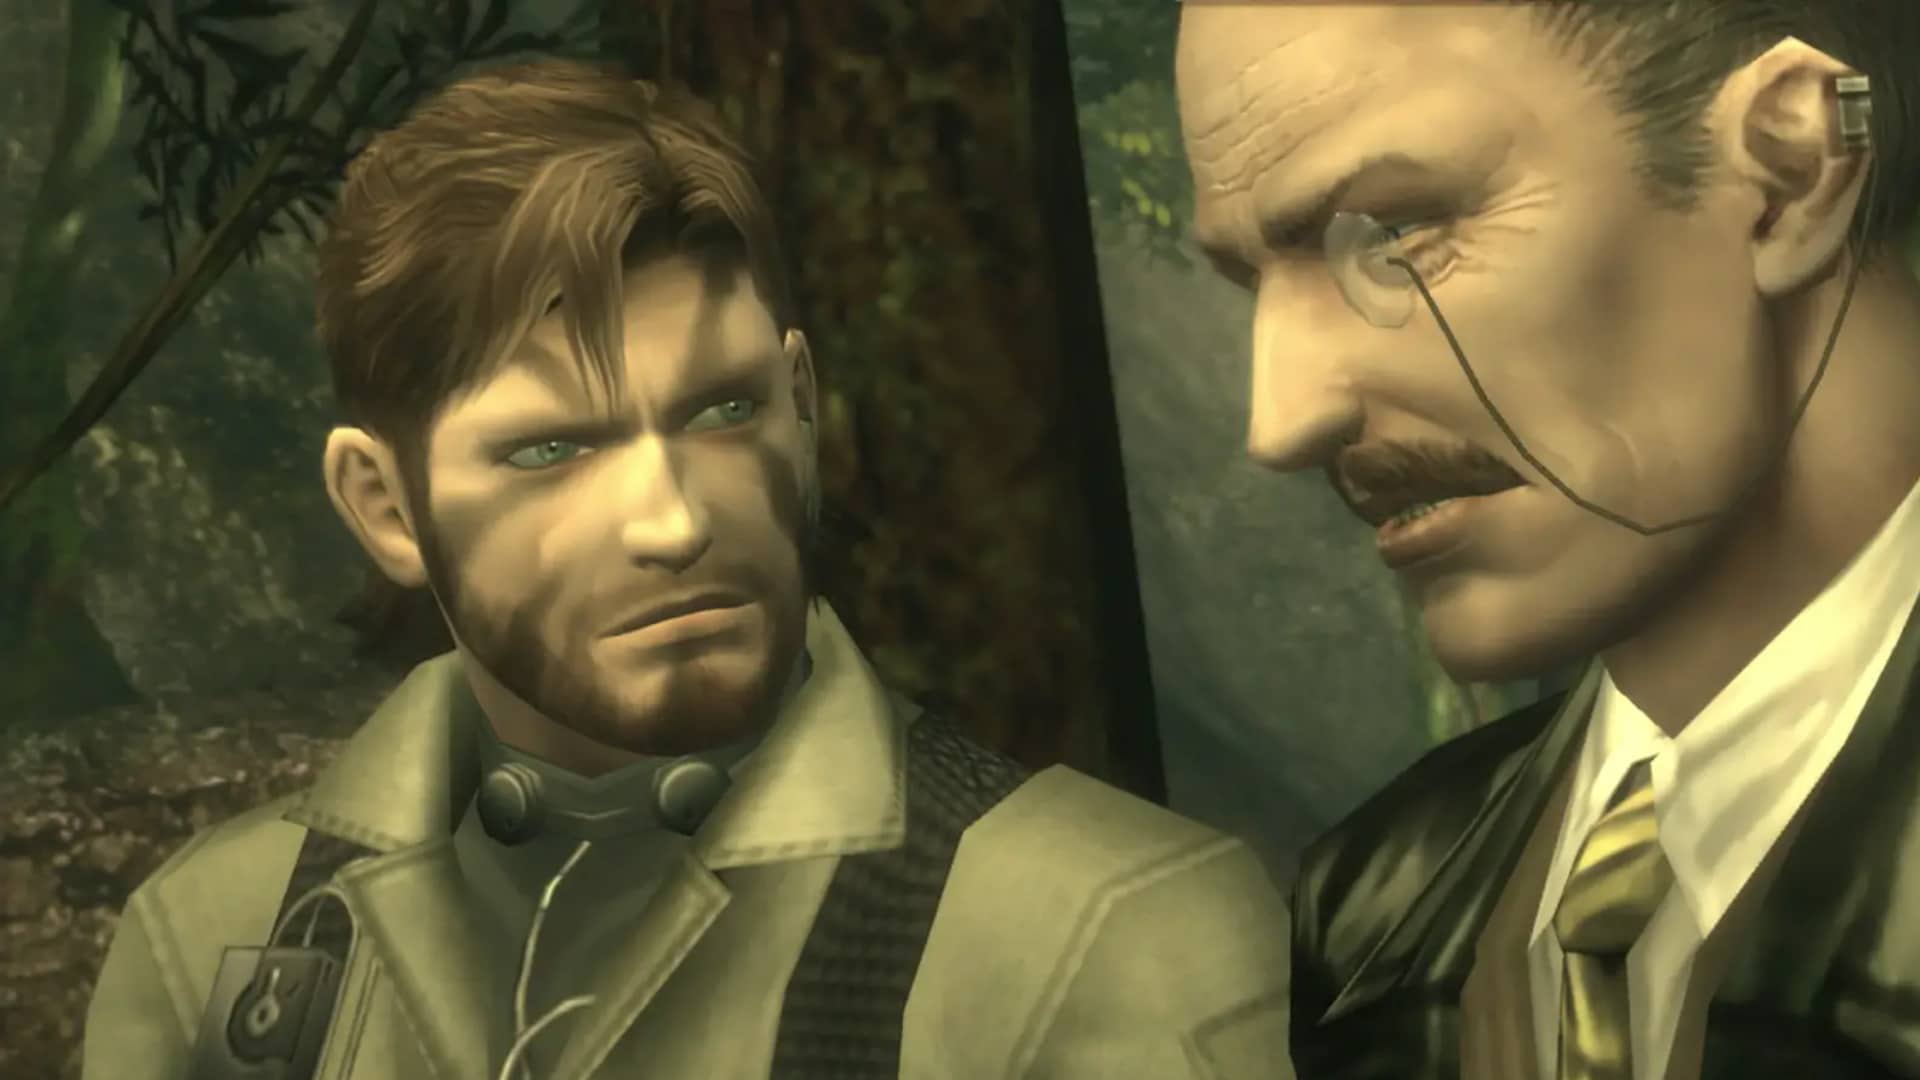 Metal Gear Solid 2 and MGS3 Snake Eater Update 1.40